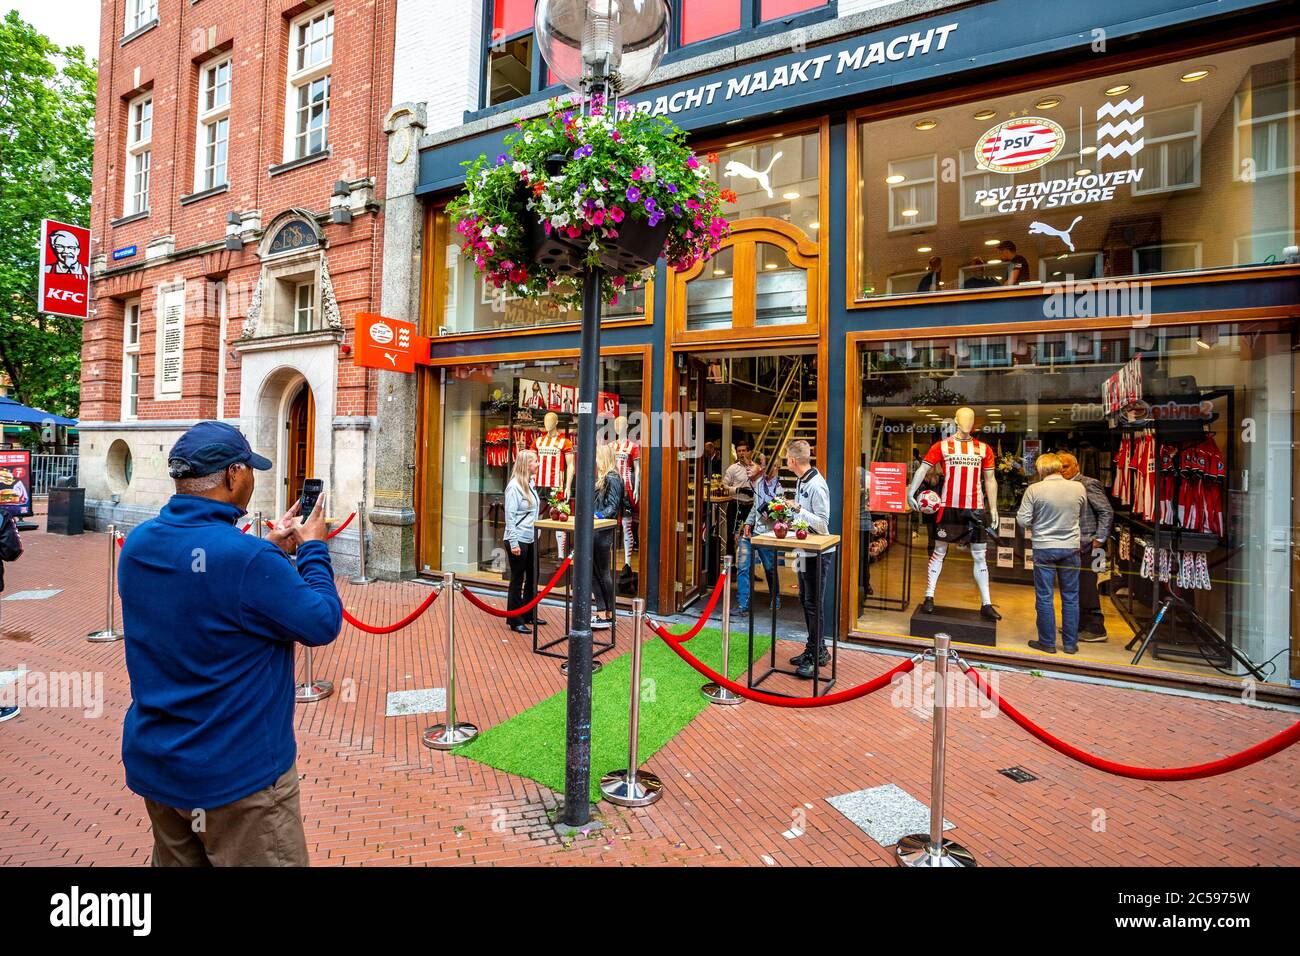 Eindhoven, Netherlands. 01st July, 2020. EINDHOVEN, 01-07-2020, PSV opens new store in city centre. New PSV Fan Store opens in centre of Eindhoven. Exterior show many ornaments from ancient Eindhoven.